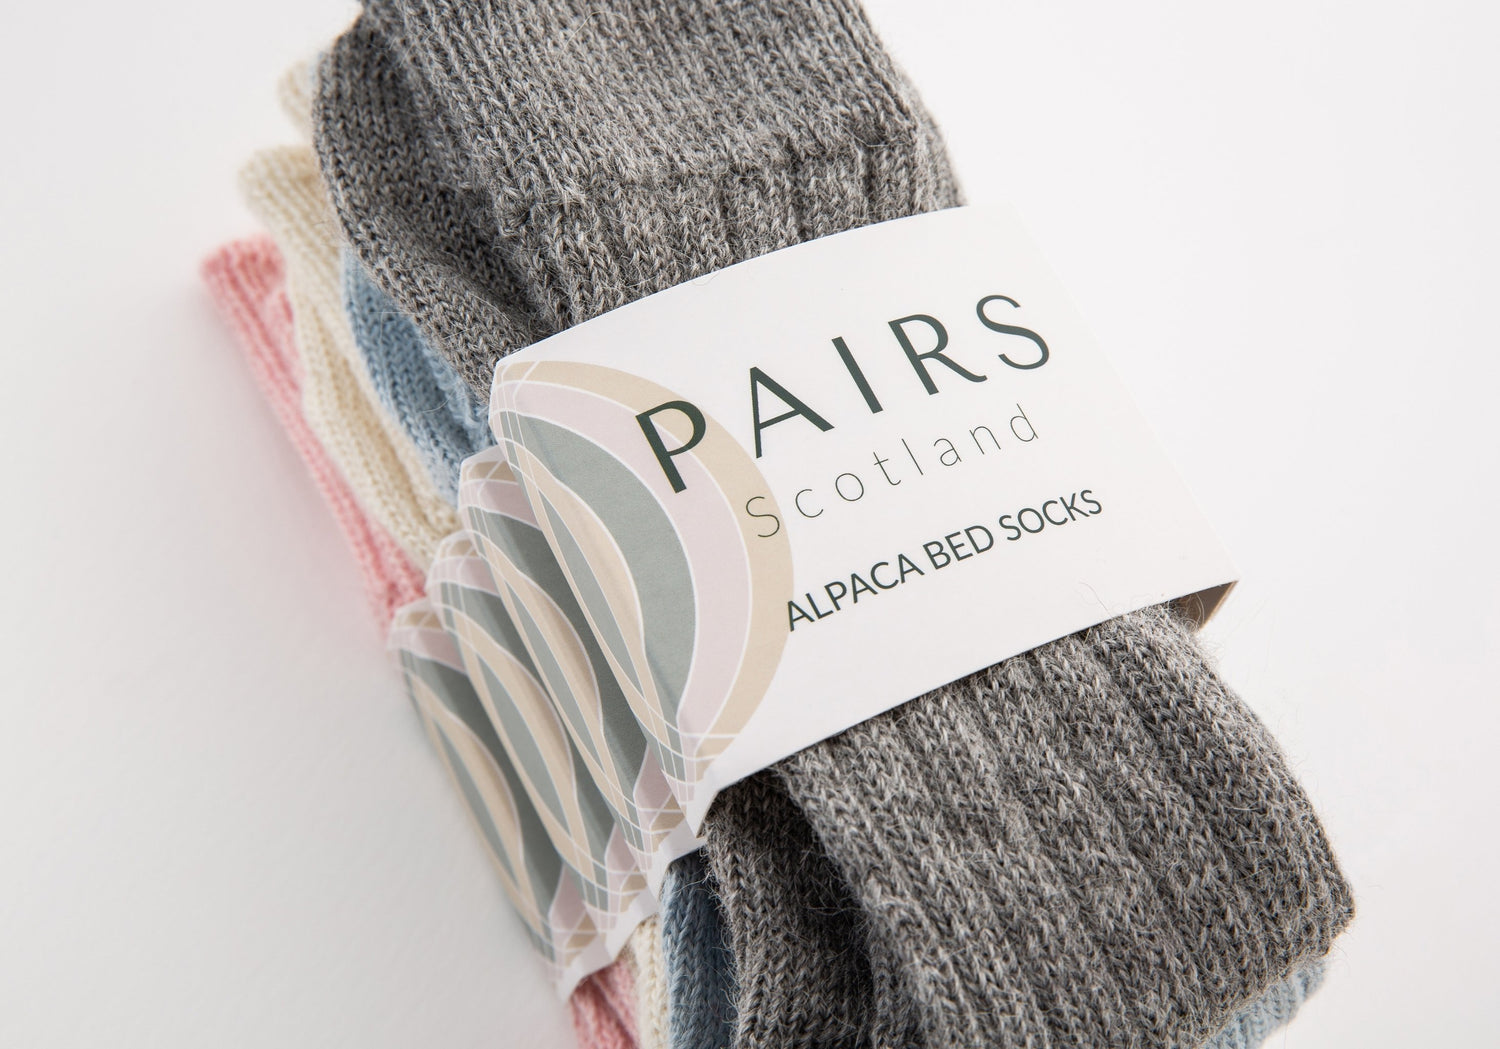 alpaca wool bed soft men and women sock range in soft hues, four pairs piled up